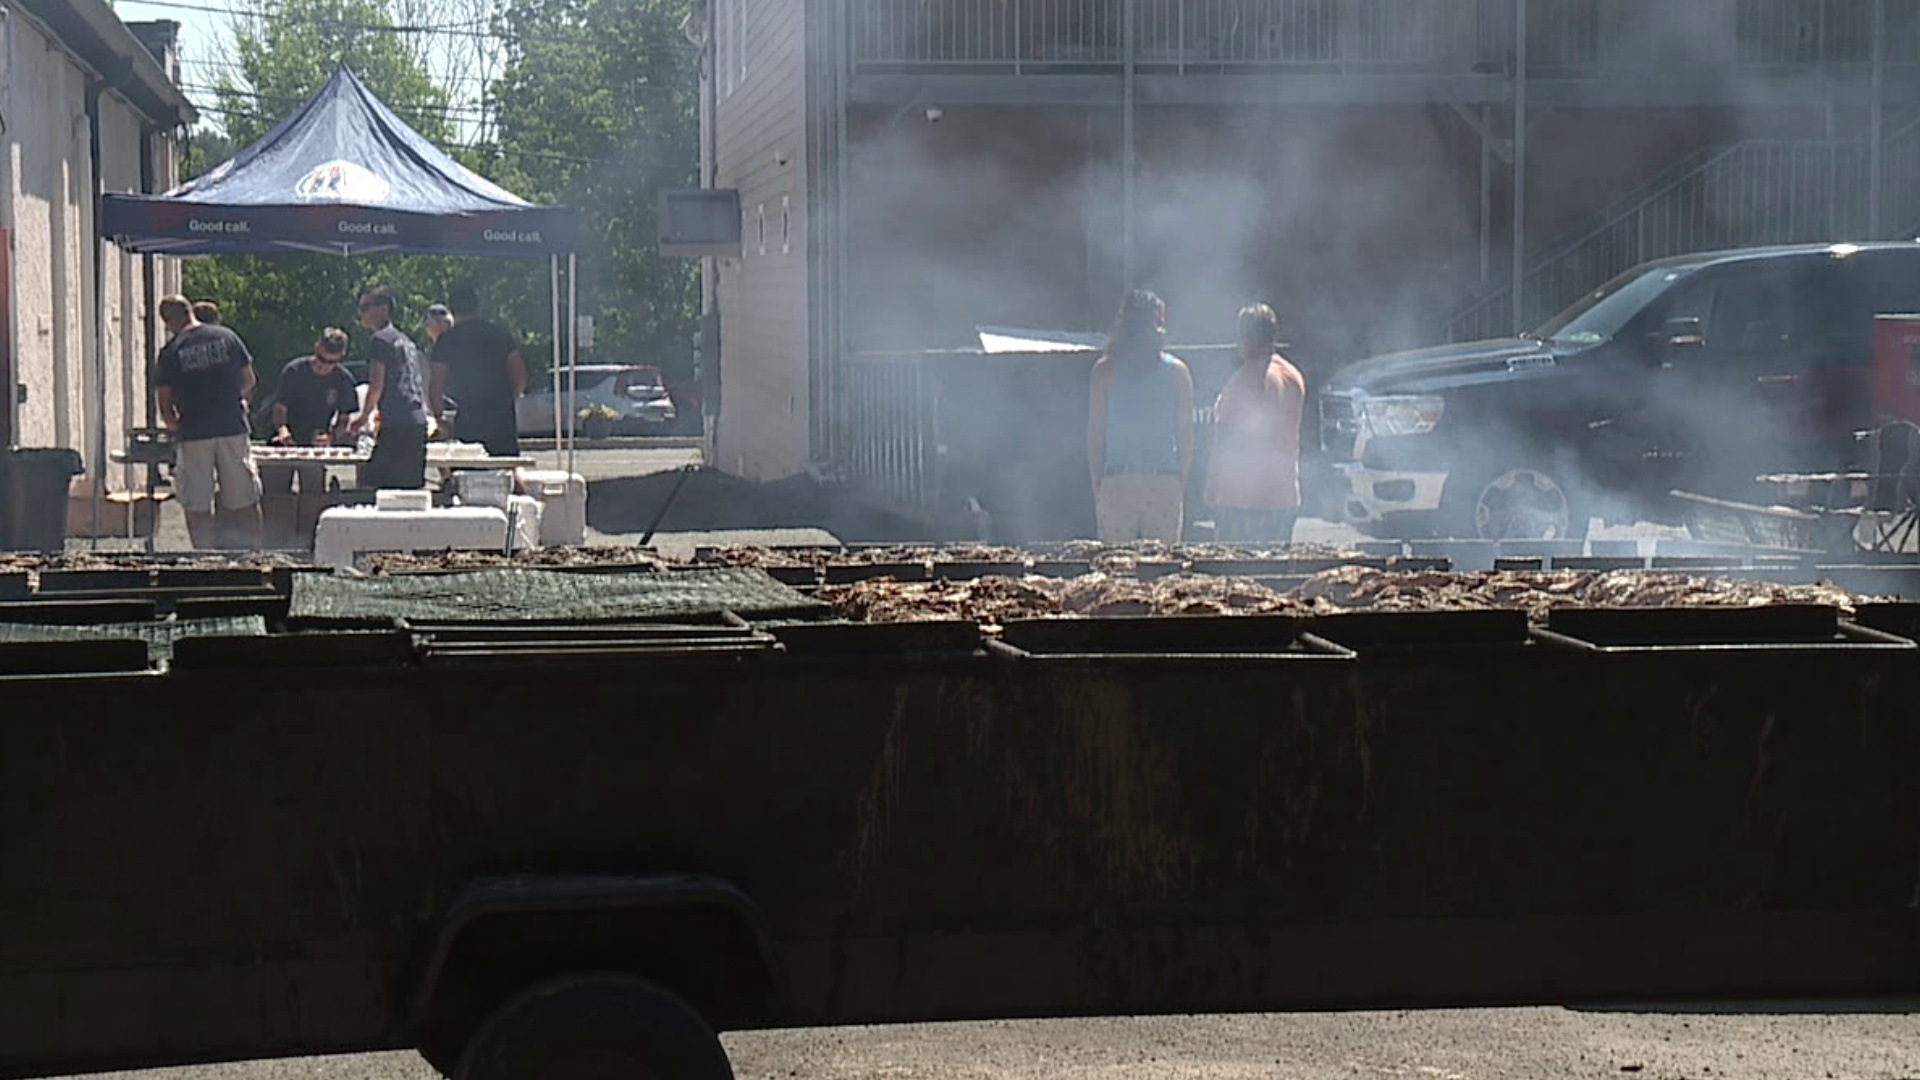 Firefighters cooked up more than a thousand chickens to raise funds.